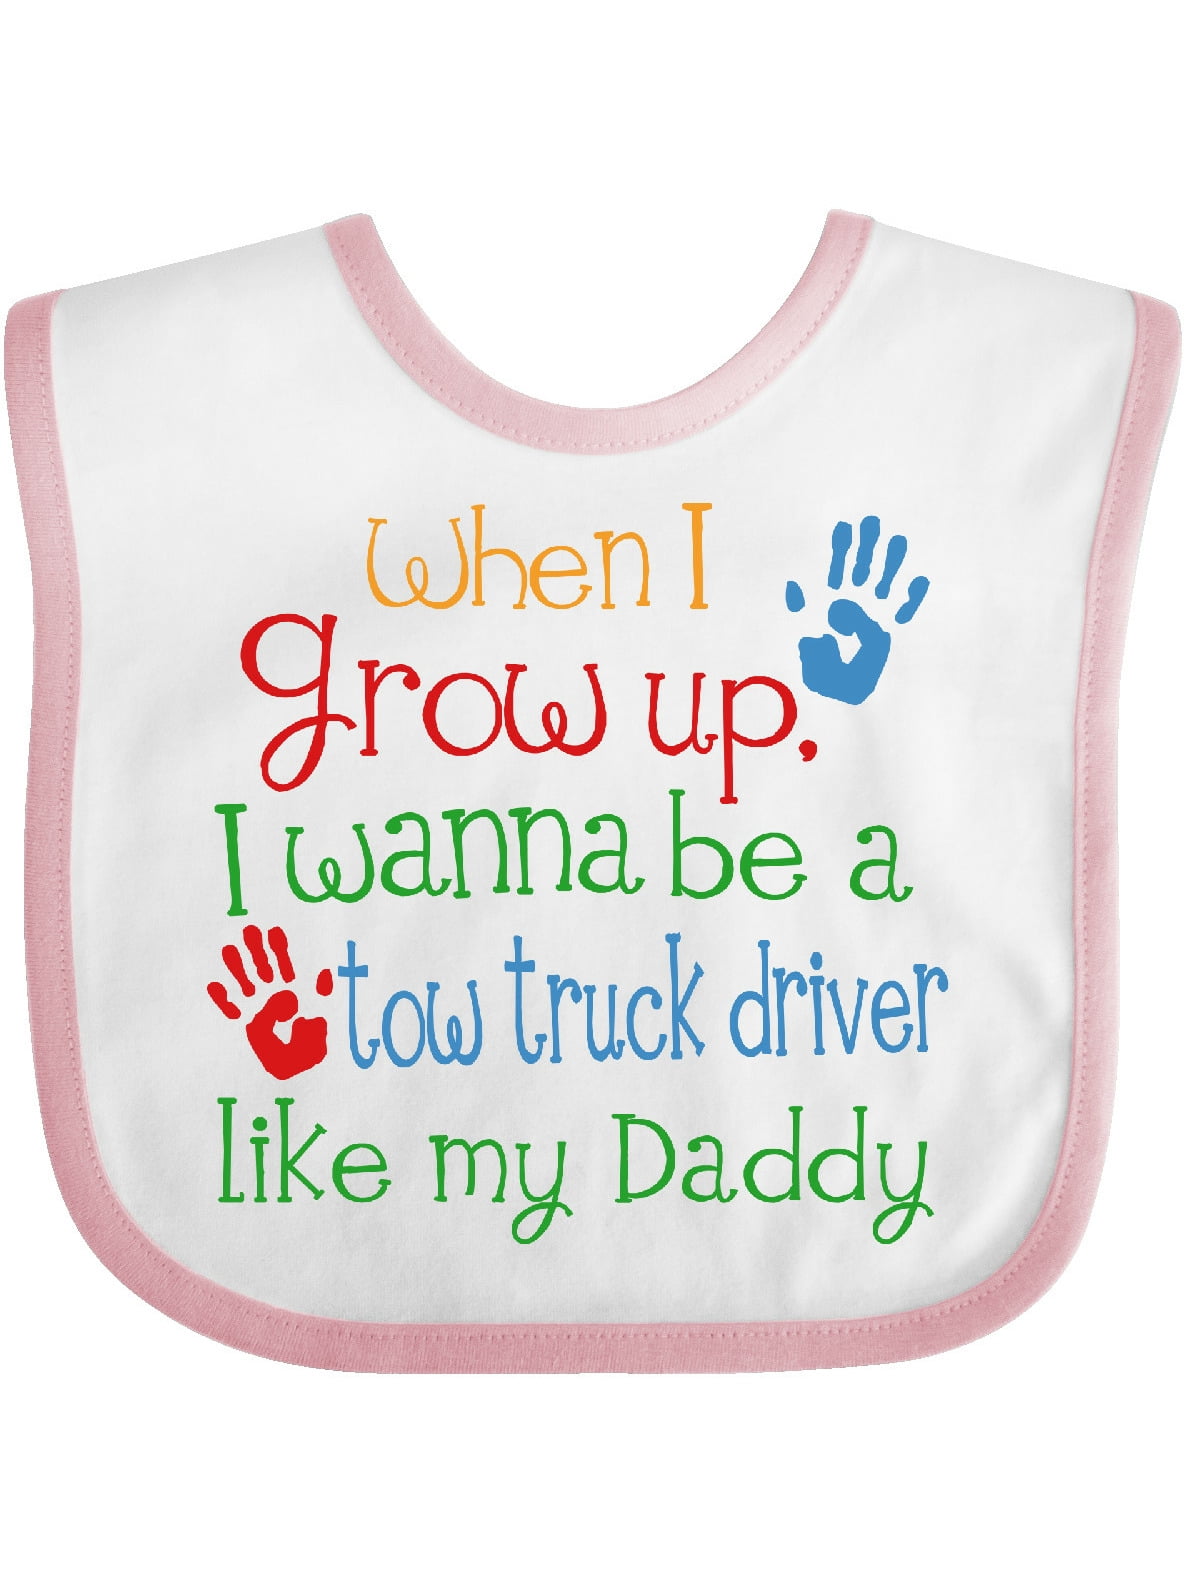 Inktastic Tow Truck Driver Like Daddy Baby Bib Childs Kids Gift Driver's Son My 